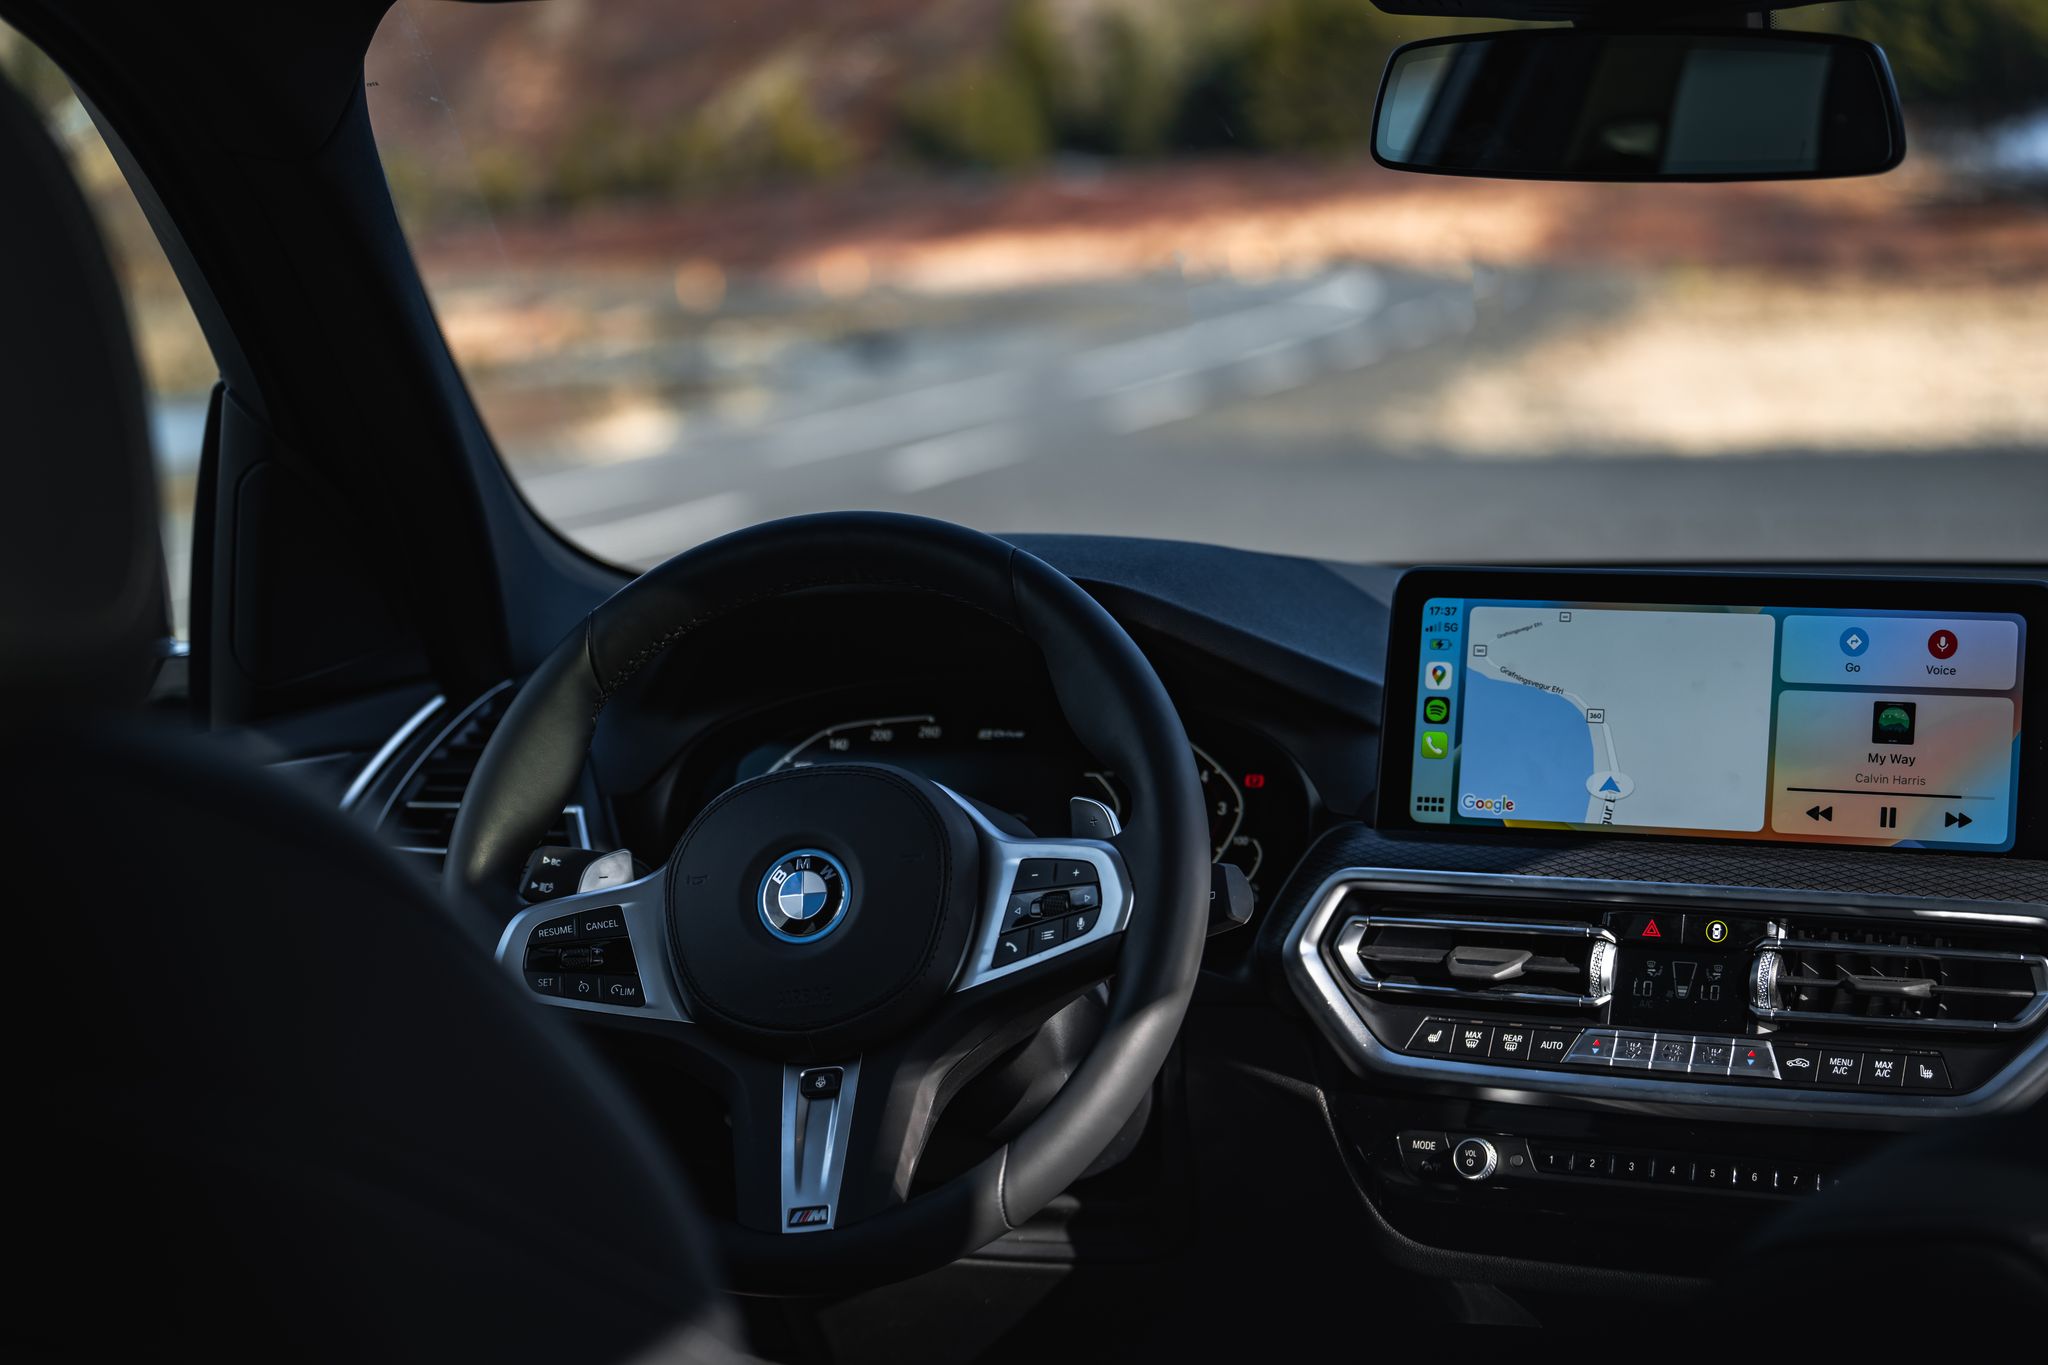 Picture from the back seat of the BMW X3 showing the dashboard and the wheel